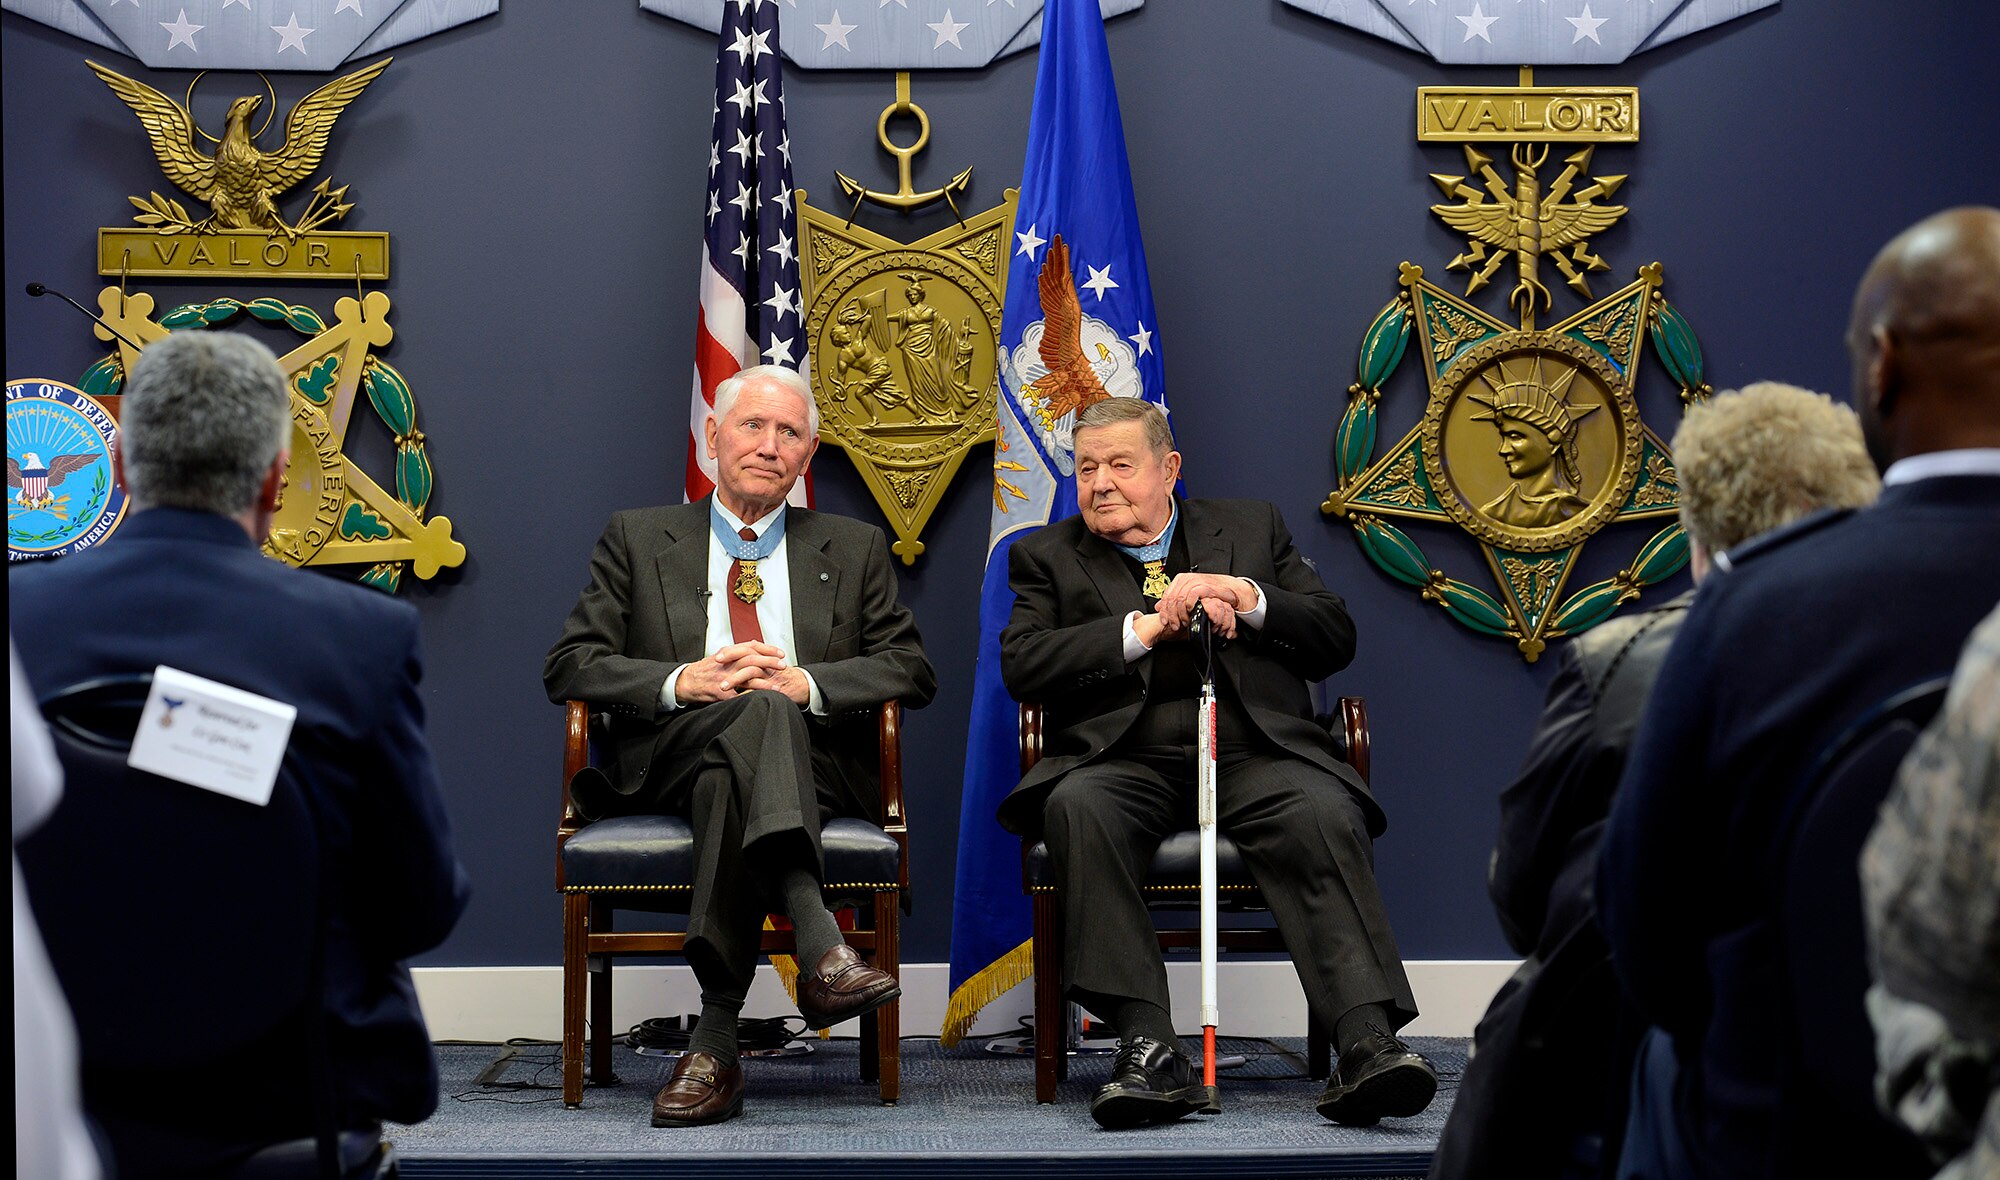 Retired Col. Leo Thorsness answers questions with retired Col. Joe Jackson, both Medals of Honor recipients, during a Q-and-A session March 24, 2015, in the Hall of Heroes at the Pentagon in Washington D.C. The pair spent about an hour taking questions from Air Staff members, and they also met with Secretary of the Air Force Deborah Lee James and Air Force Vice Chief of Staff Gen. Larry Spencer.  (U.S. Air Force photo/Scott M. Ash)